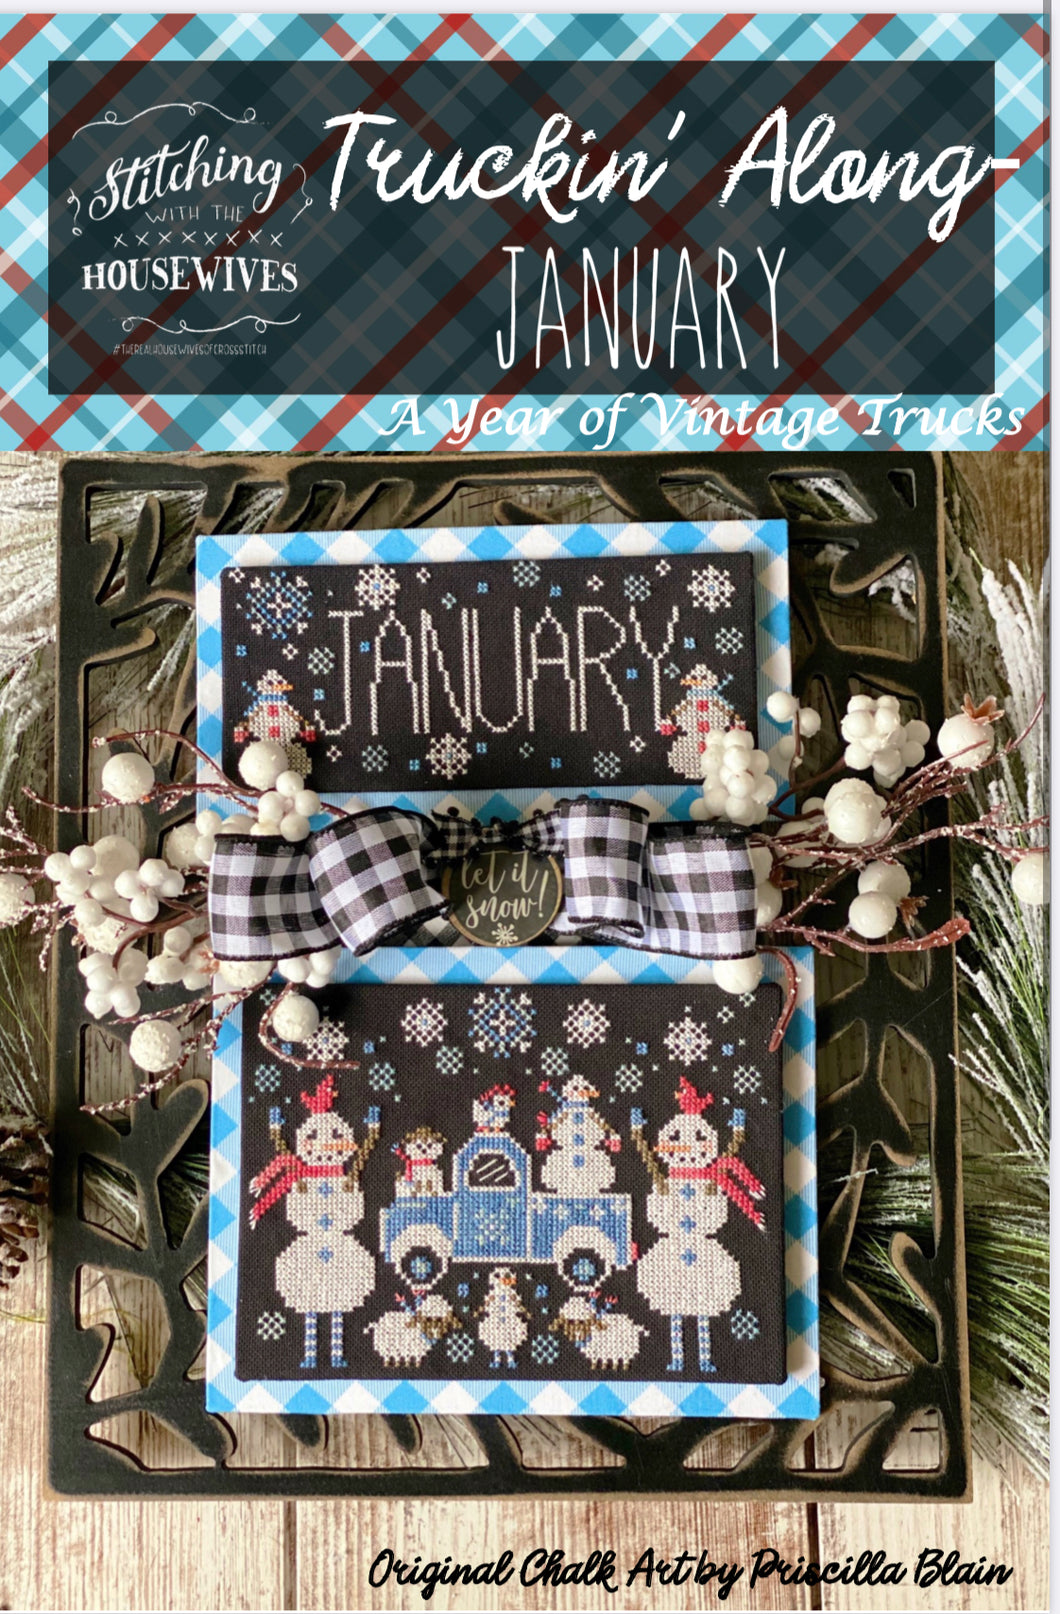 Truckin' Along - January by Stitching With the Housewives